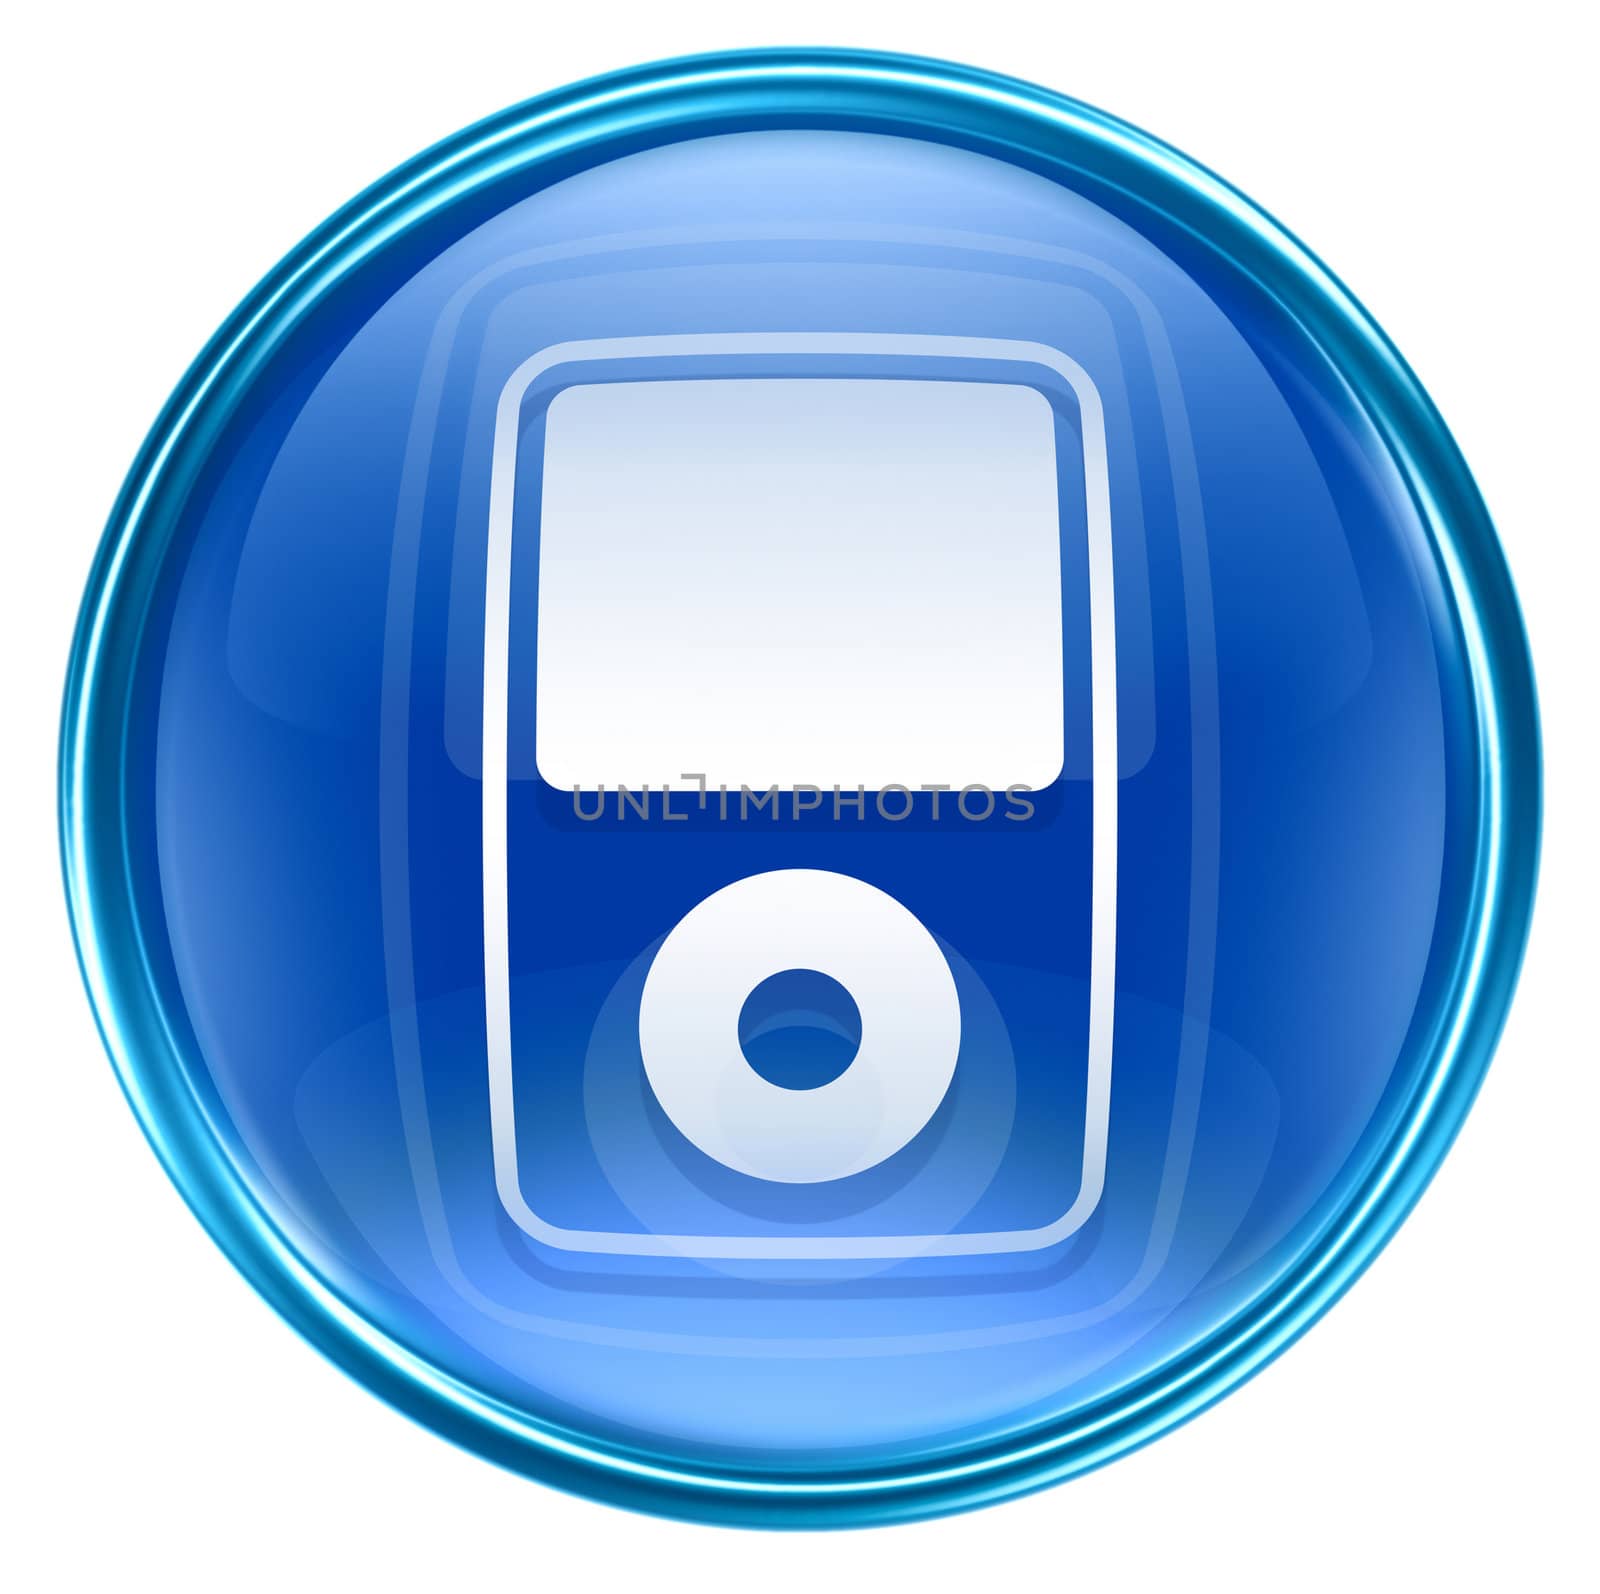 mp3 player blue, isolated on white background